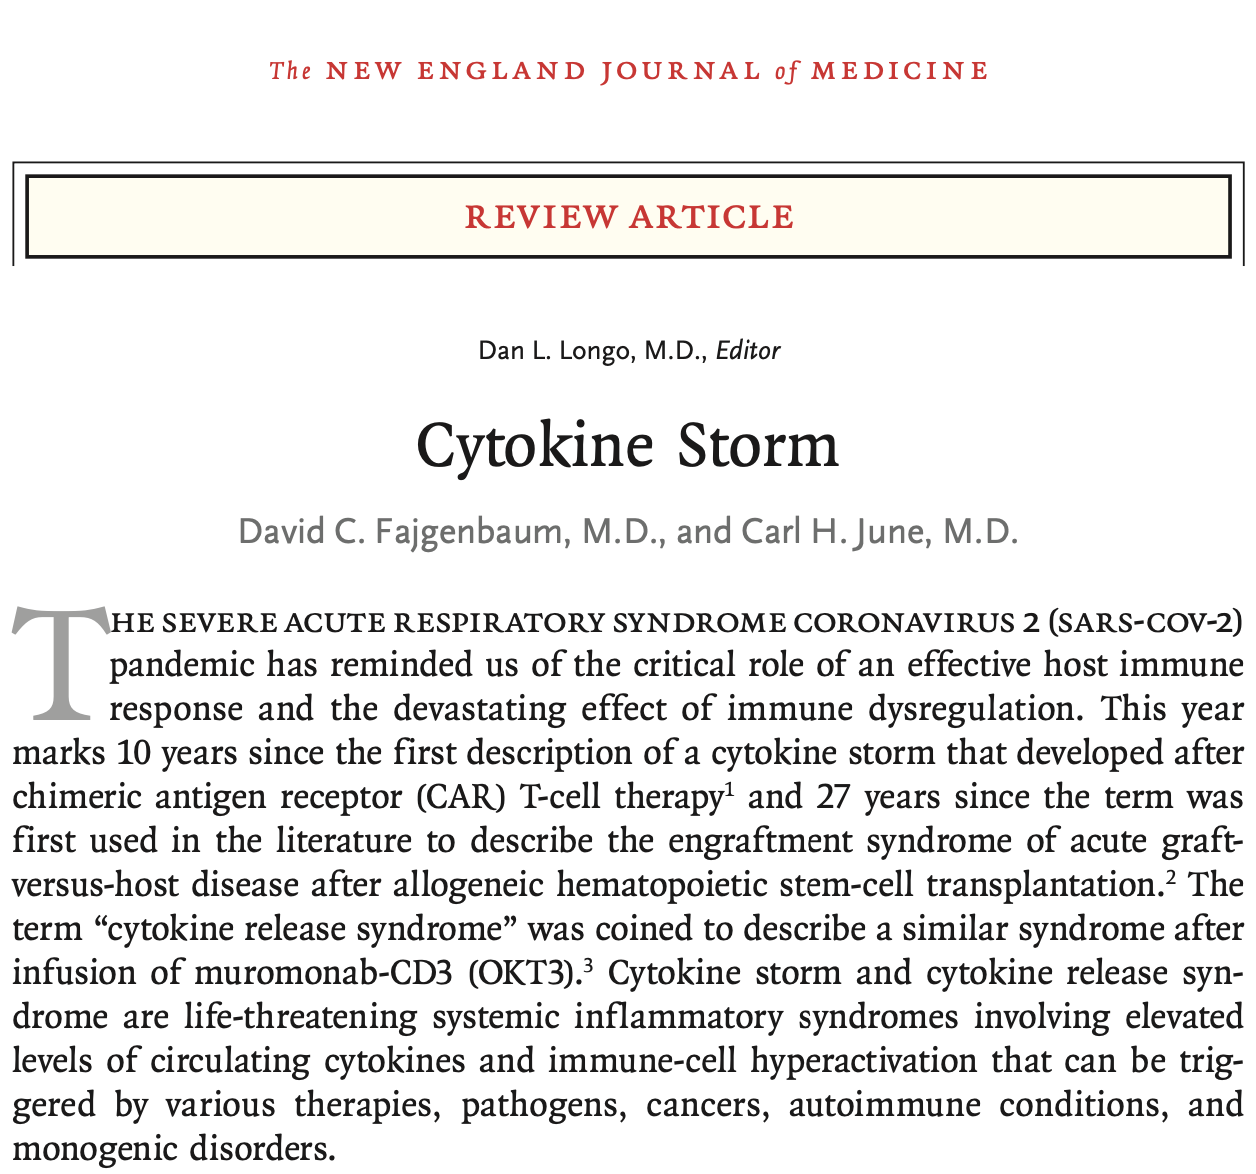 New England Journal of Medicine published our paper on Cytokine Storm